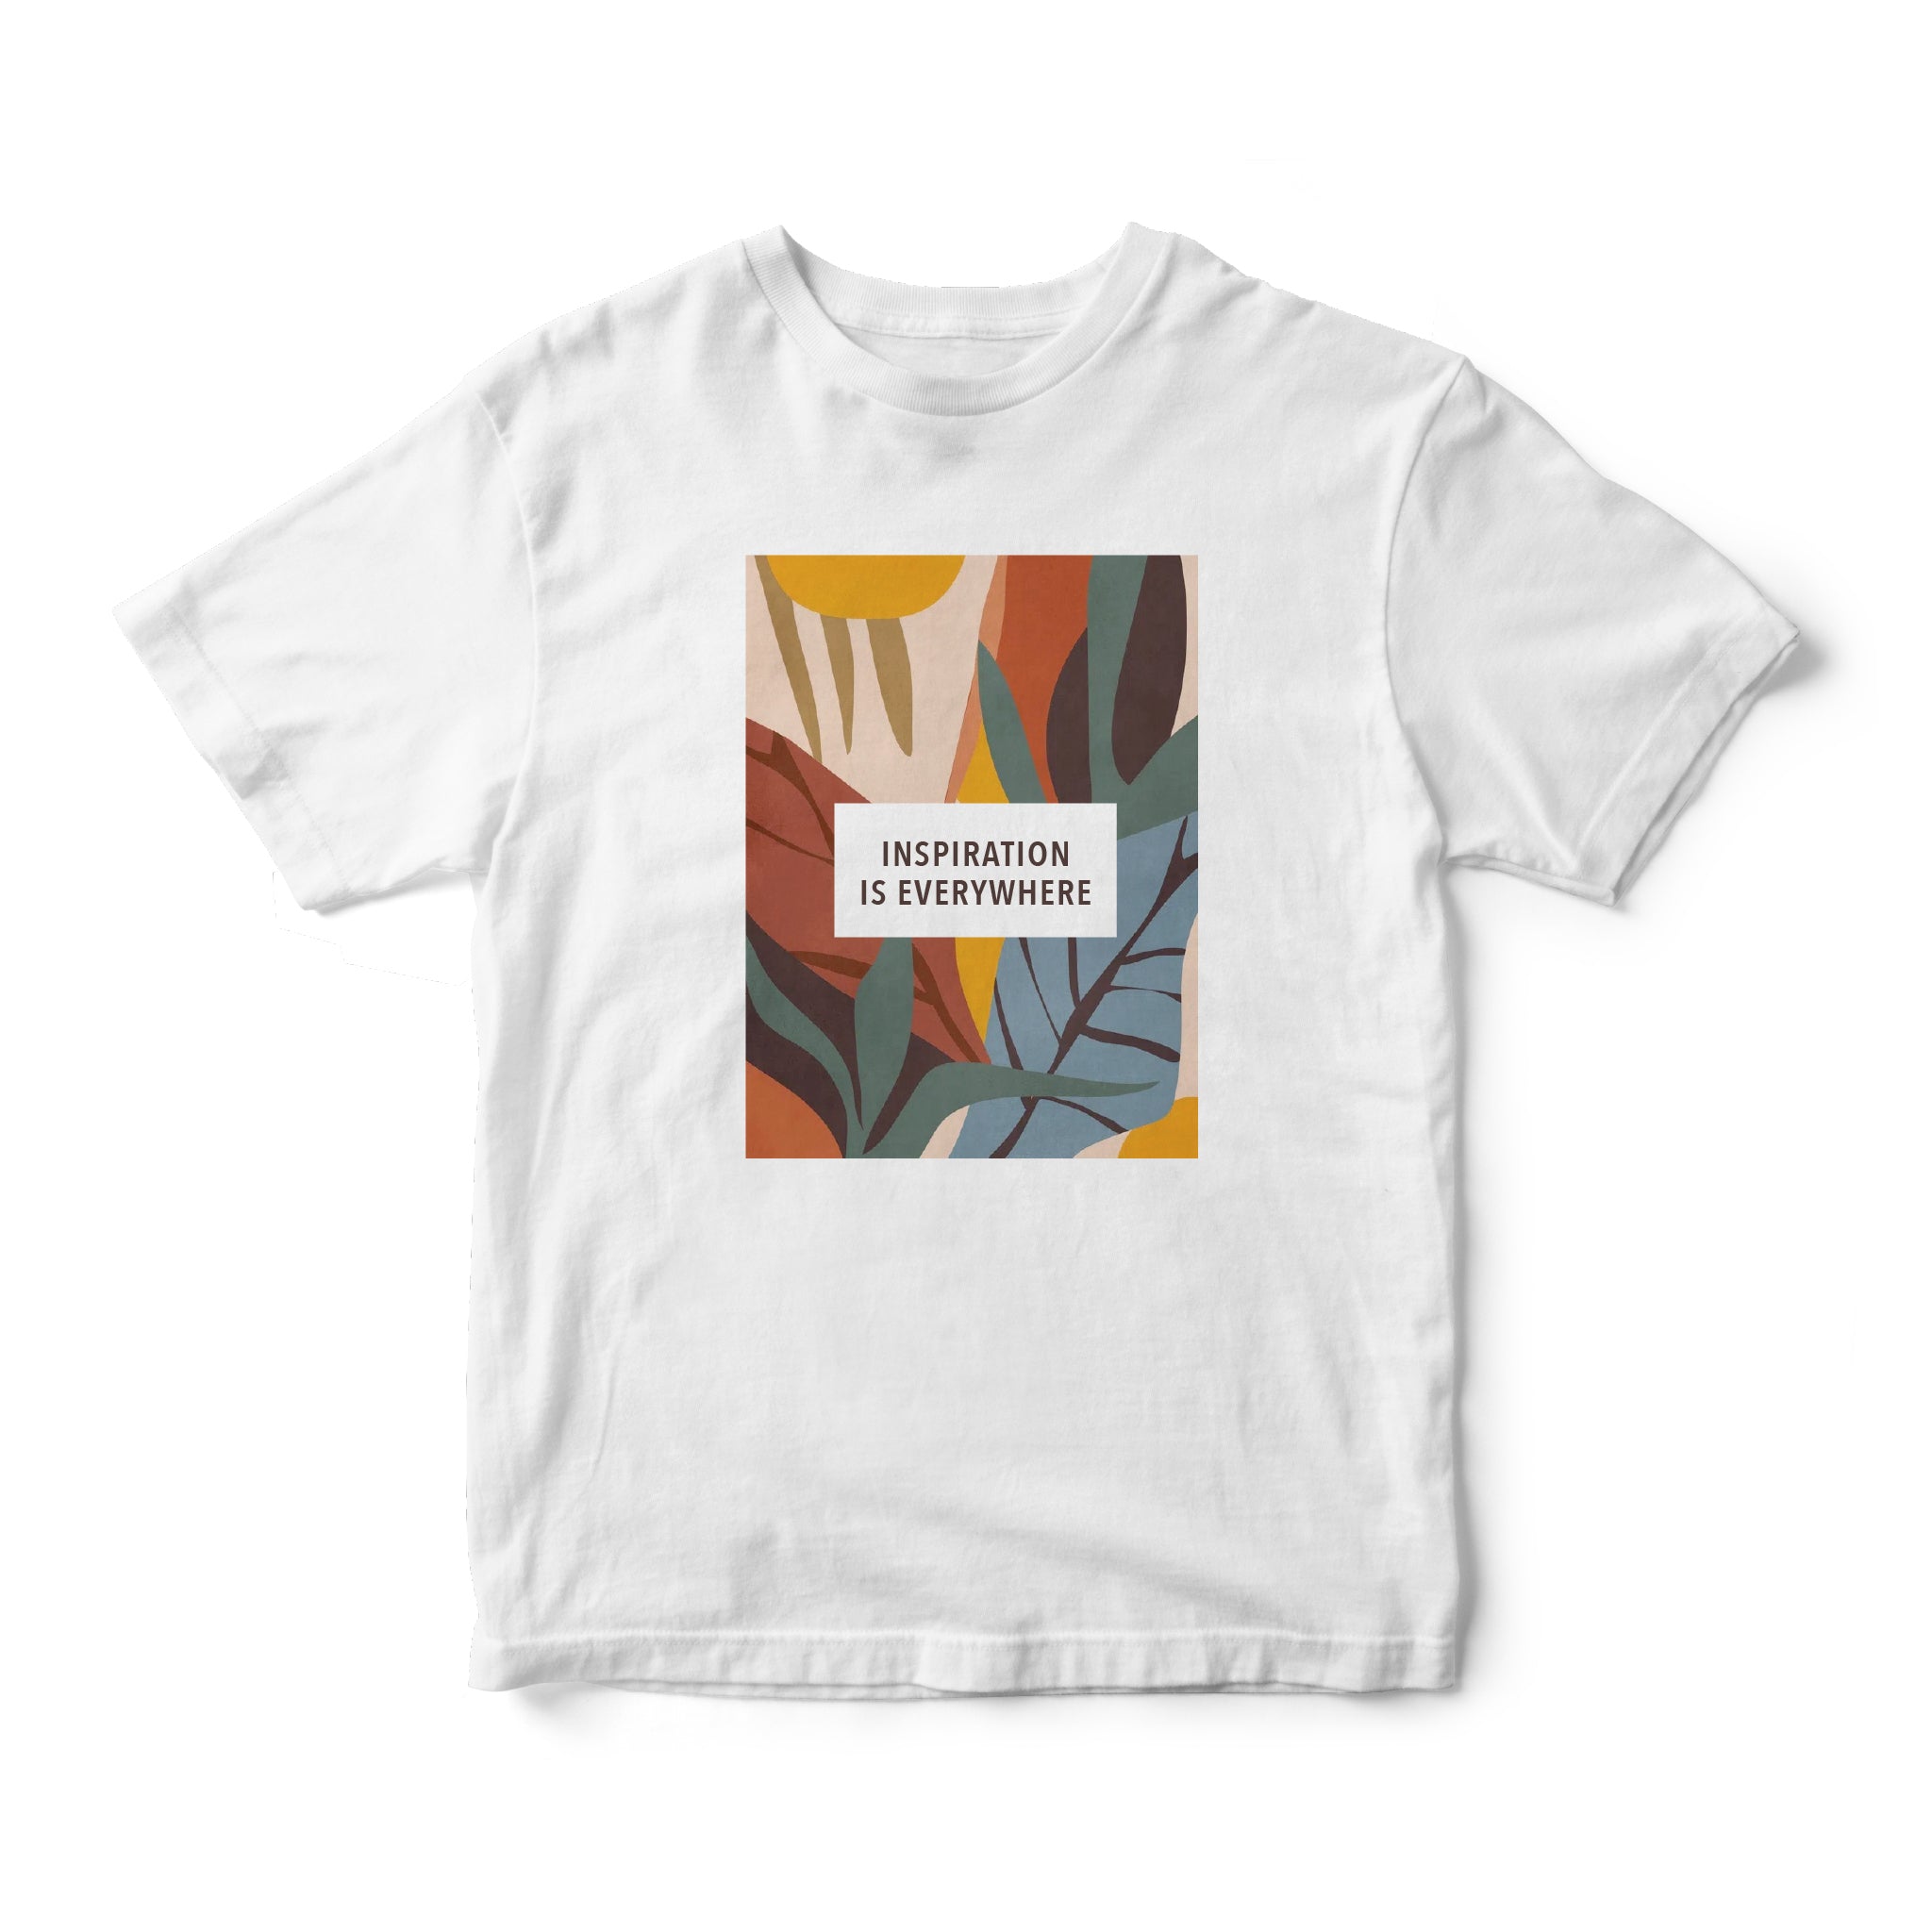 Instee Inspiration is Everywhere T-shirt Unisex 100% Cotton